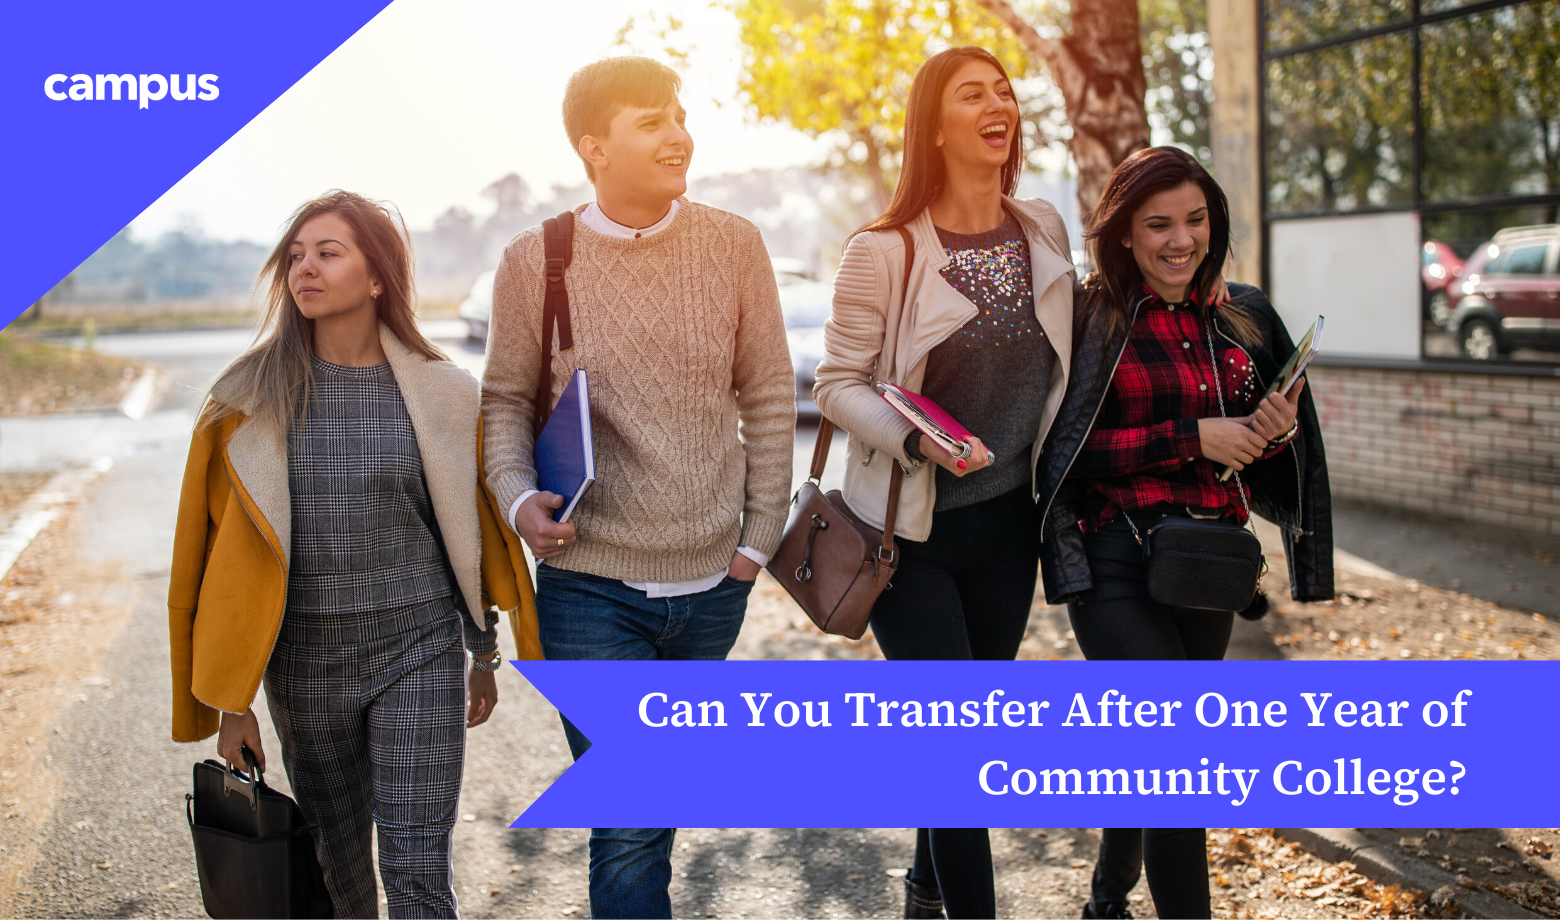 Can You Transfer After One Year of Community College?